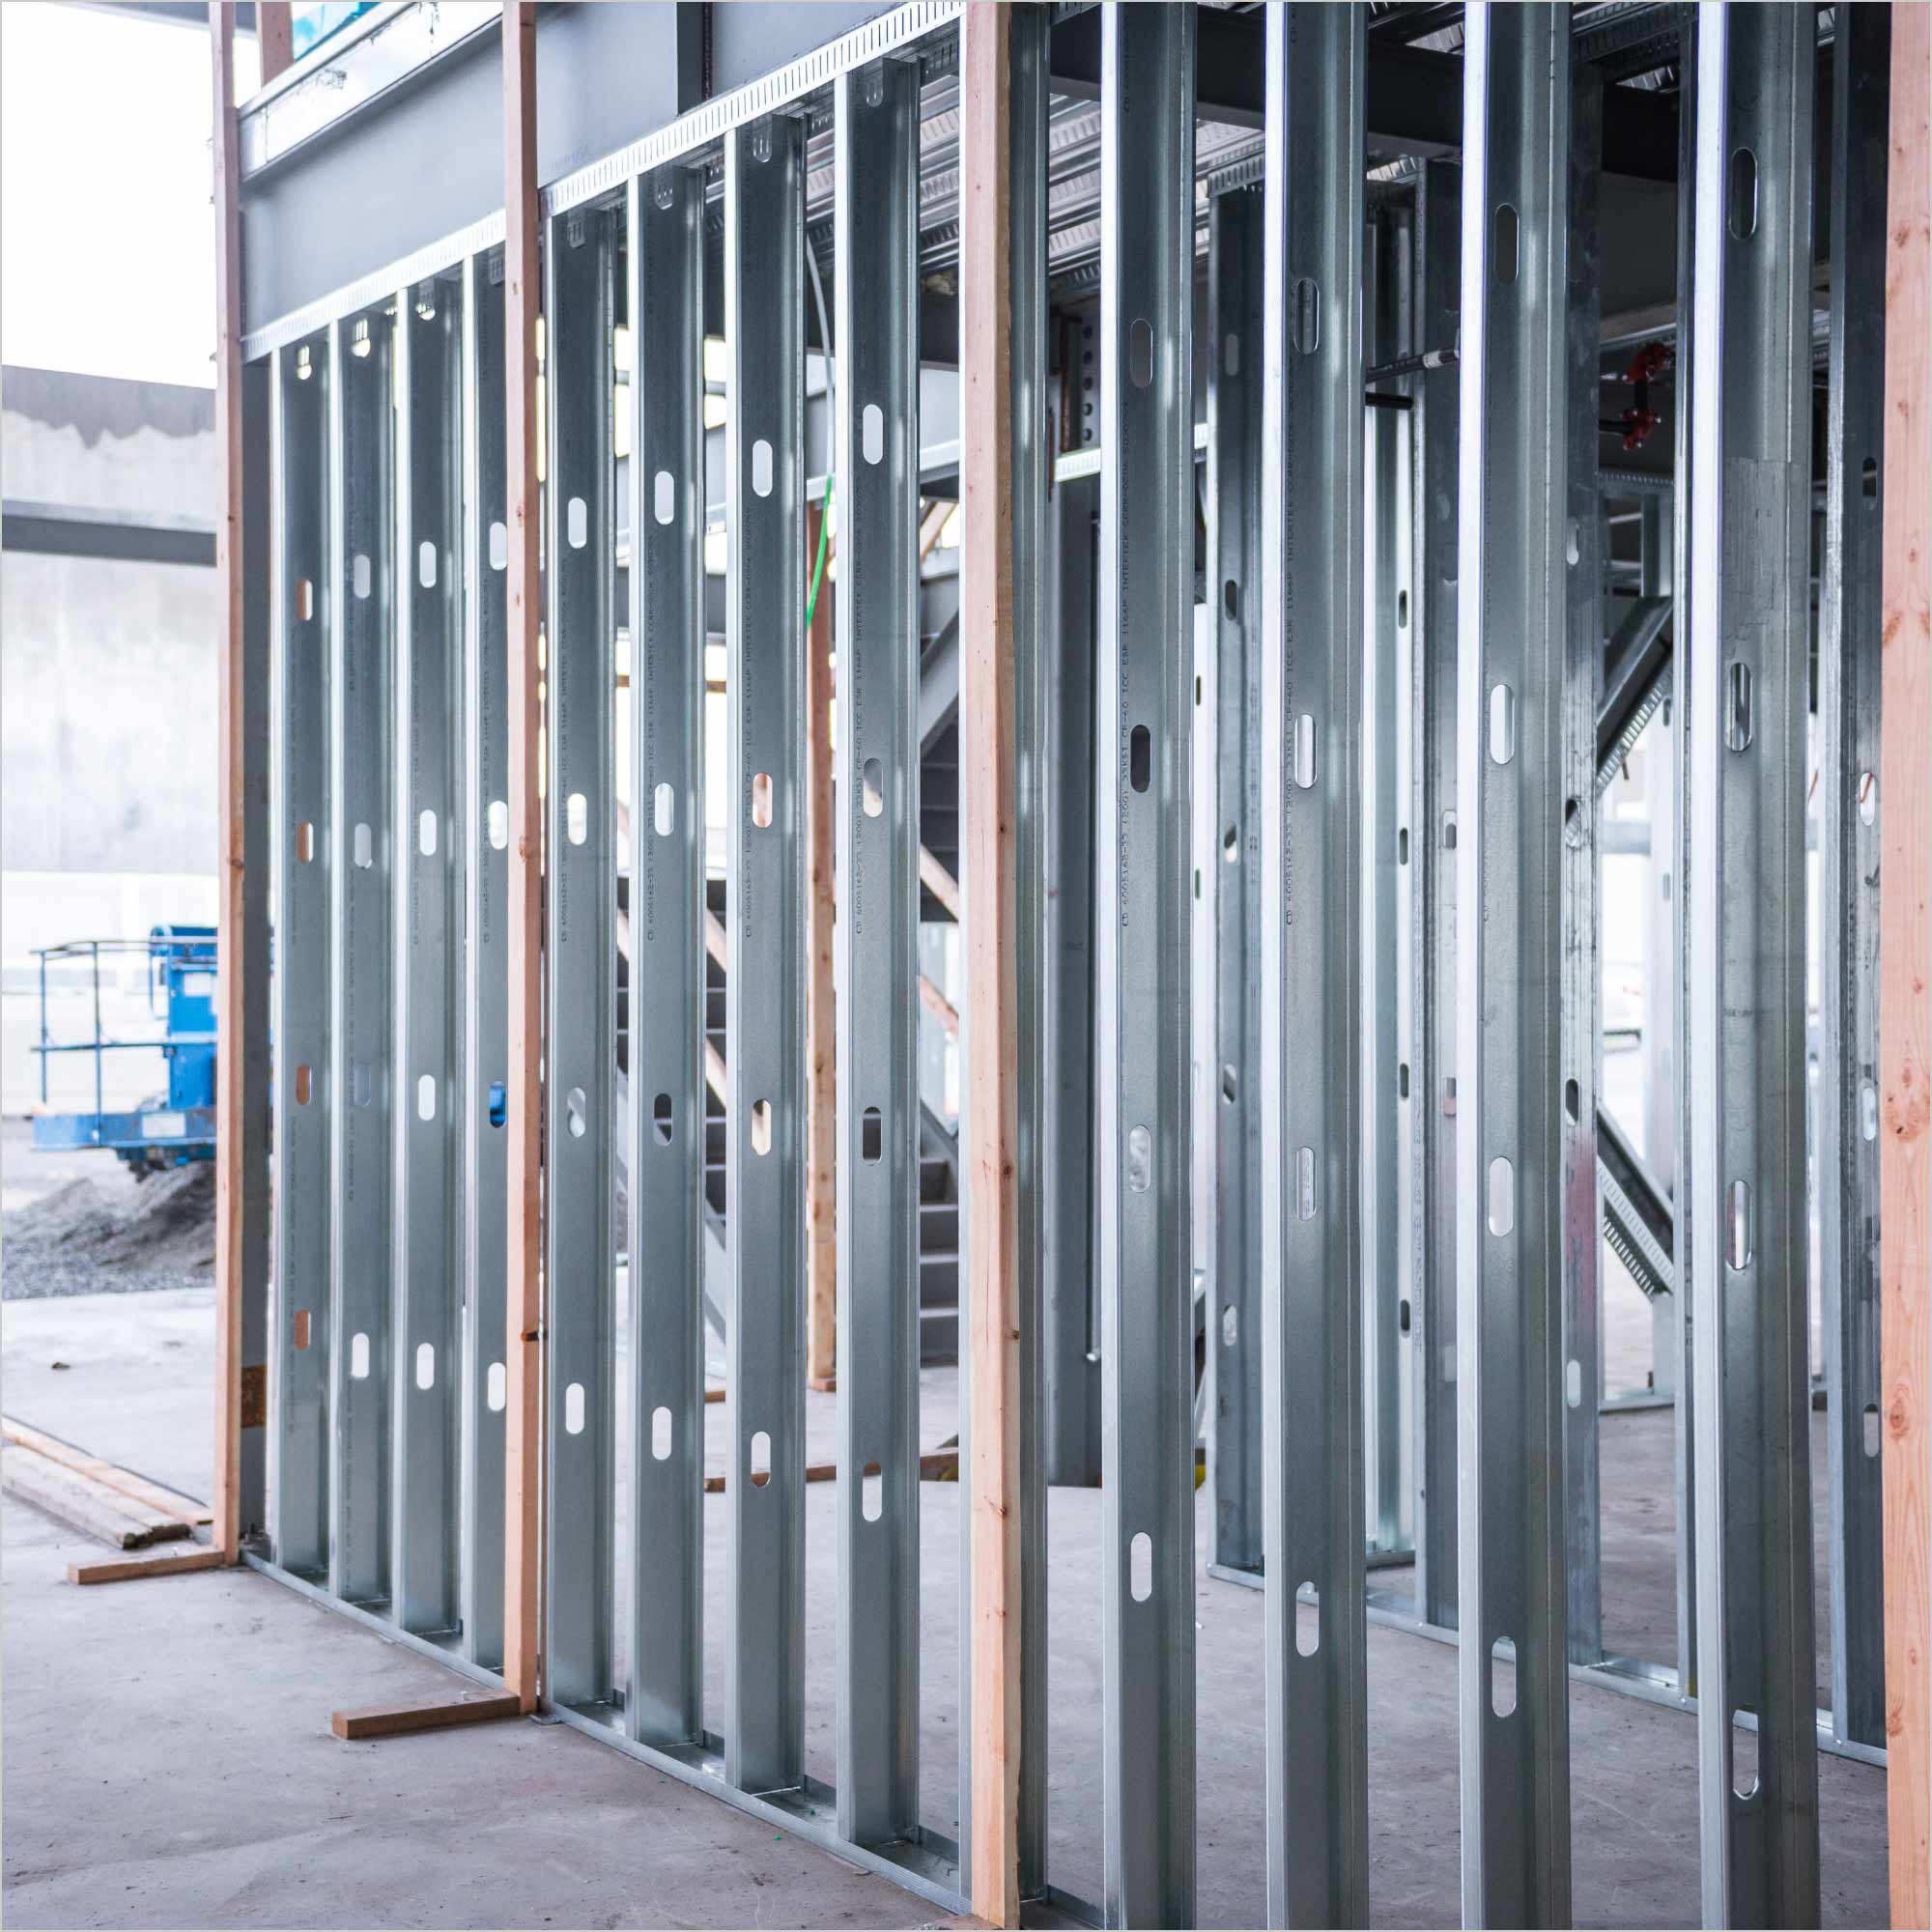 Various metal stud framing materials including galvanized steel and aluminum studs